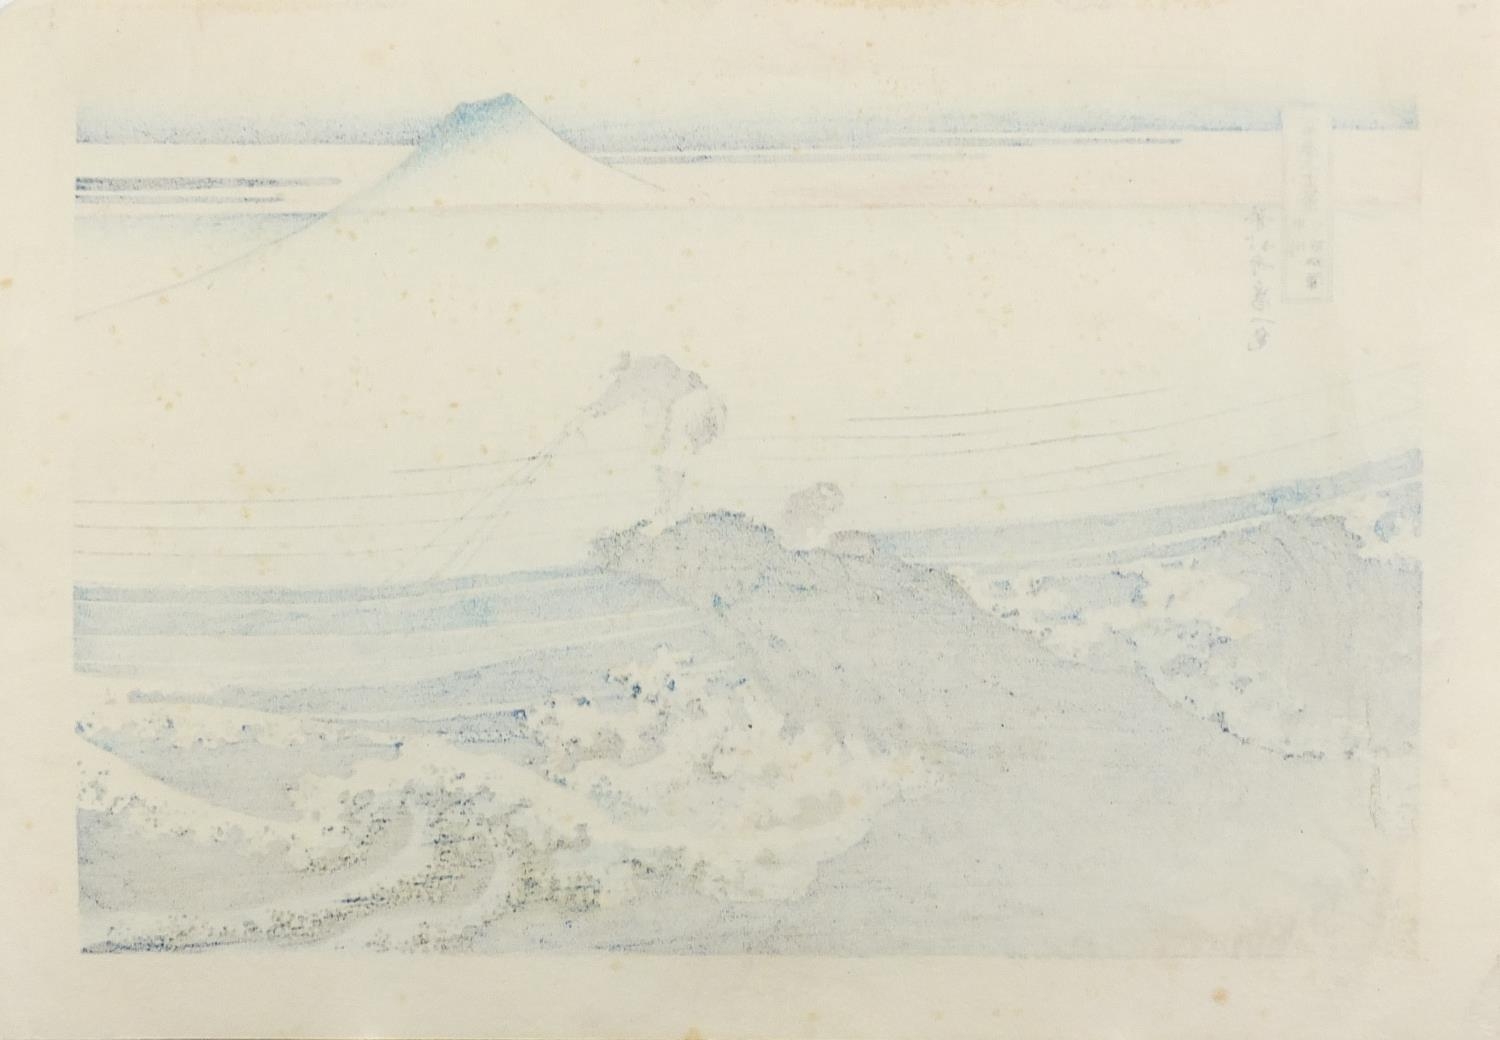 Seven Japanese prints including birds and figures on a cliff top before crashing waves, unframed, - Image 13 of 22